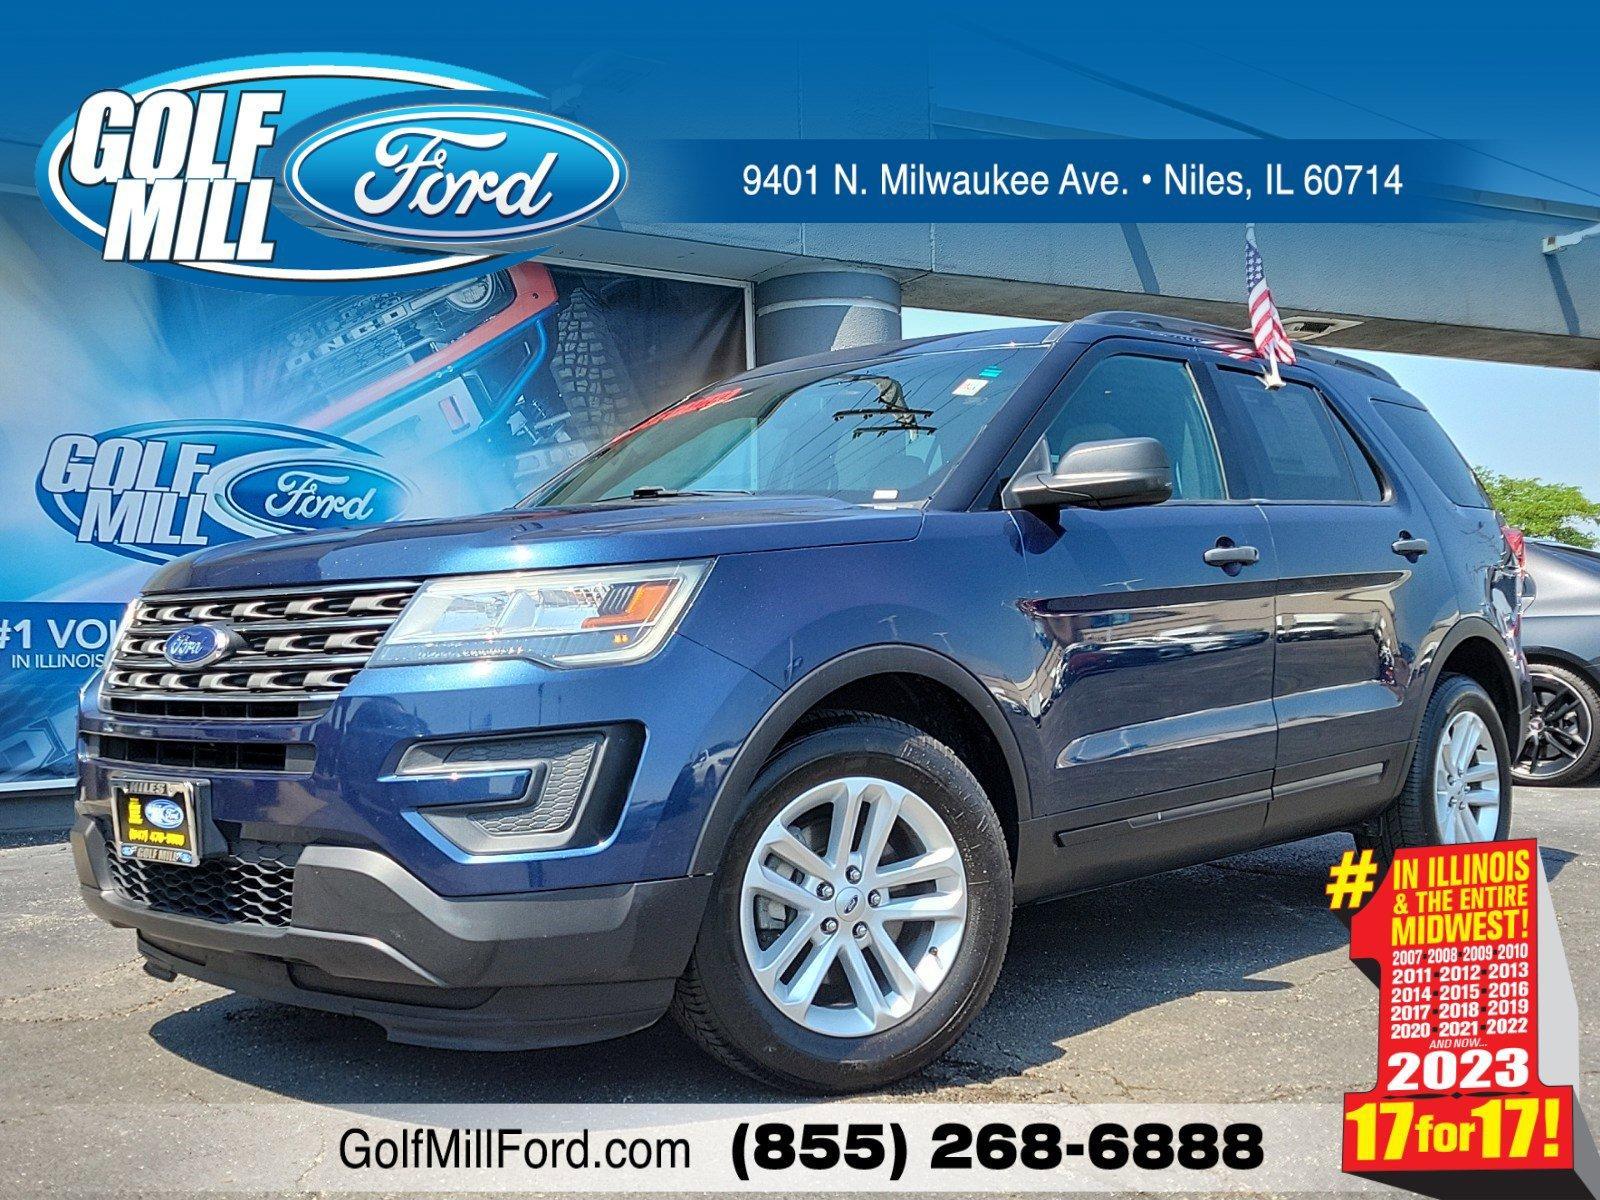 2017 Ford Explorer Vehicle Photo in Saint Charles, IL 60174